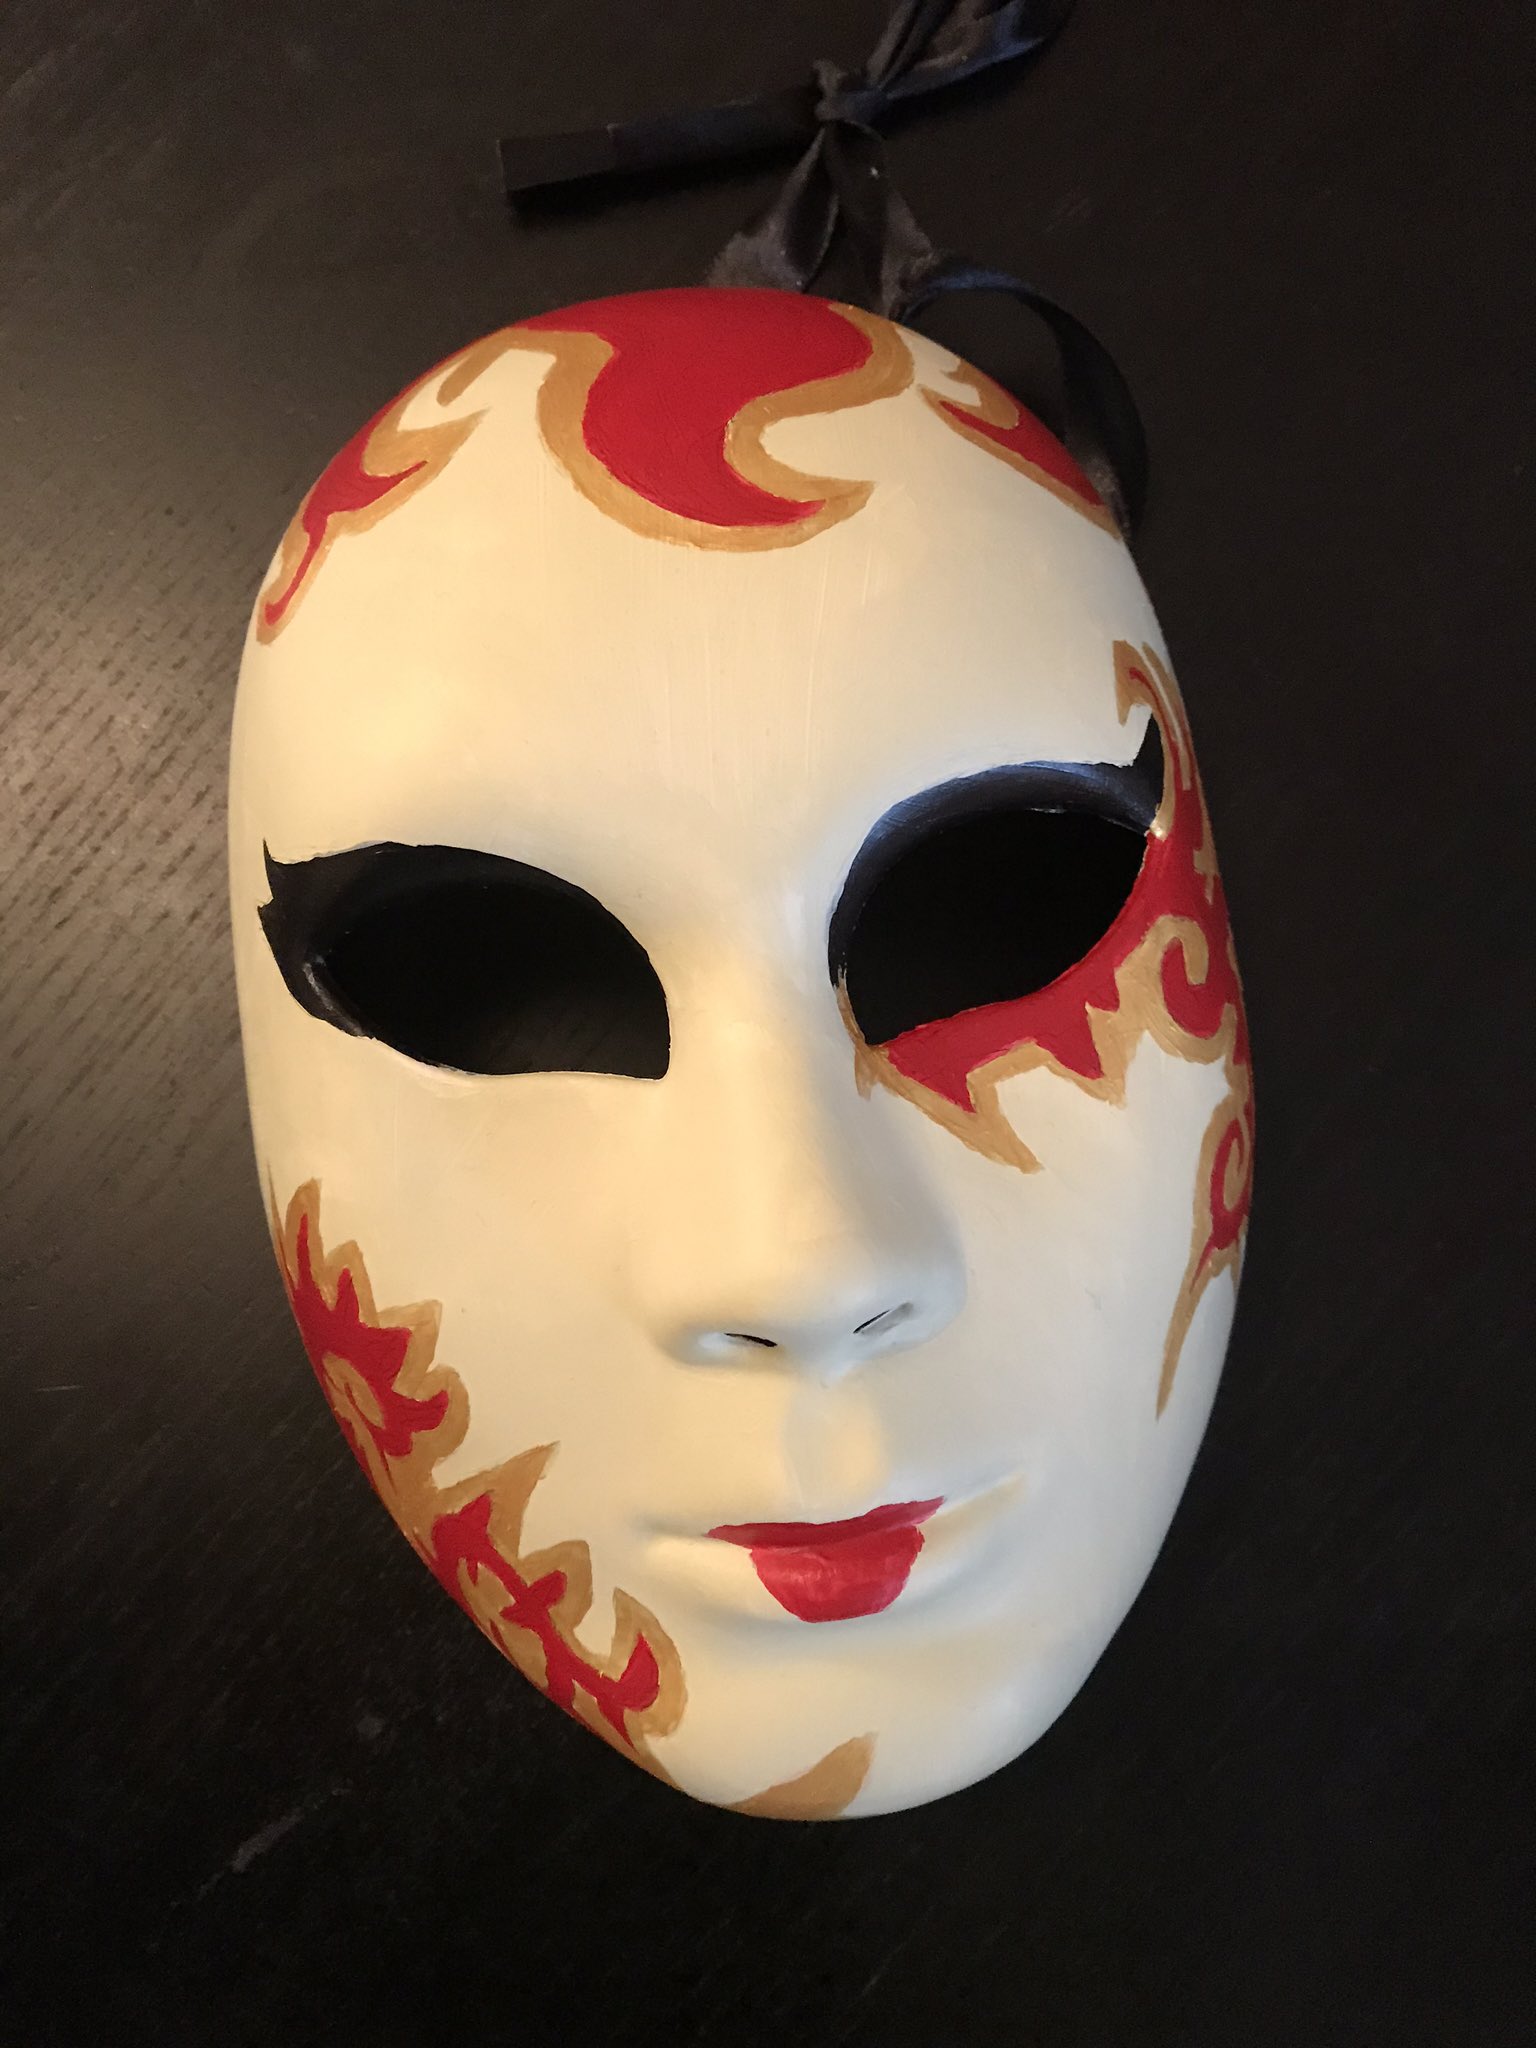 Painting Venetian Masks - Custom Masks for Comics by Miguel Guerra